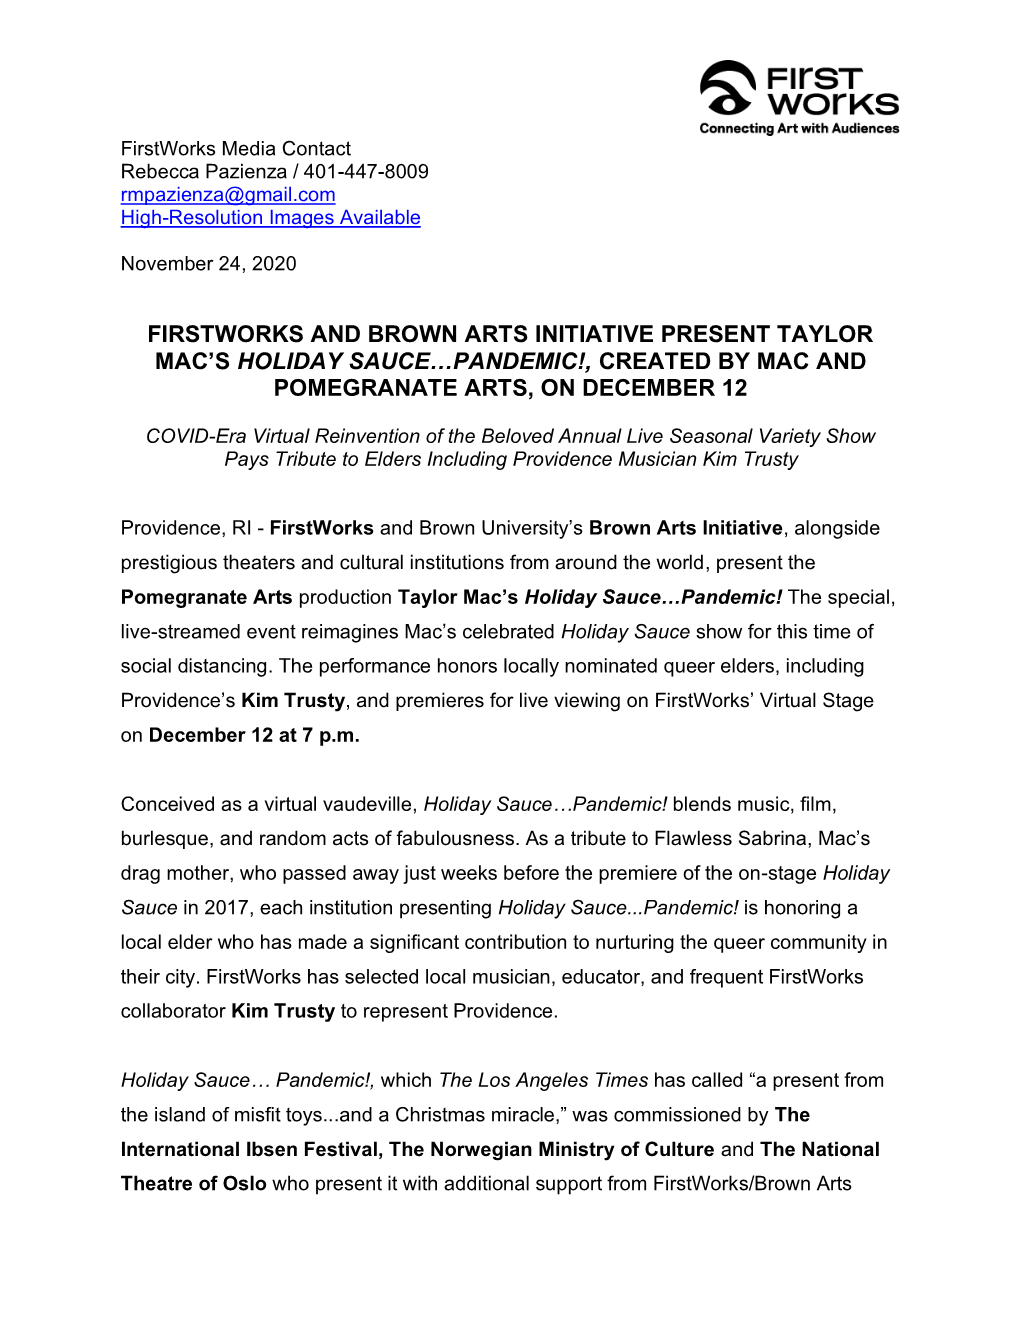 Firstworks and Brown Arts Initiative Present Taylor Mac's Holiday Sauce